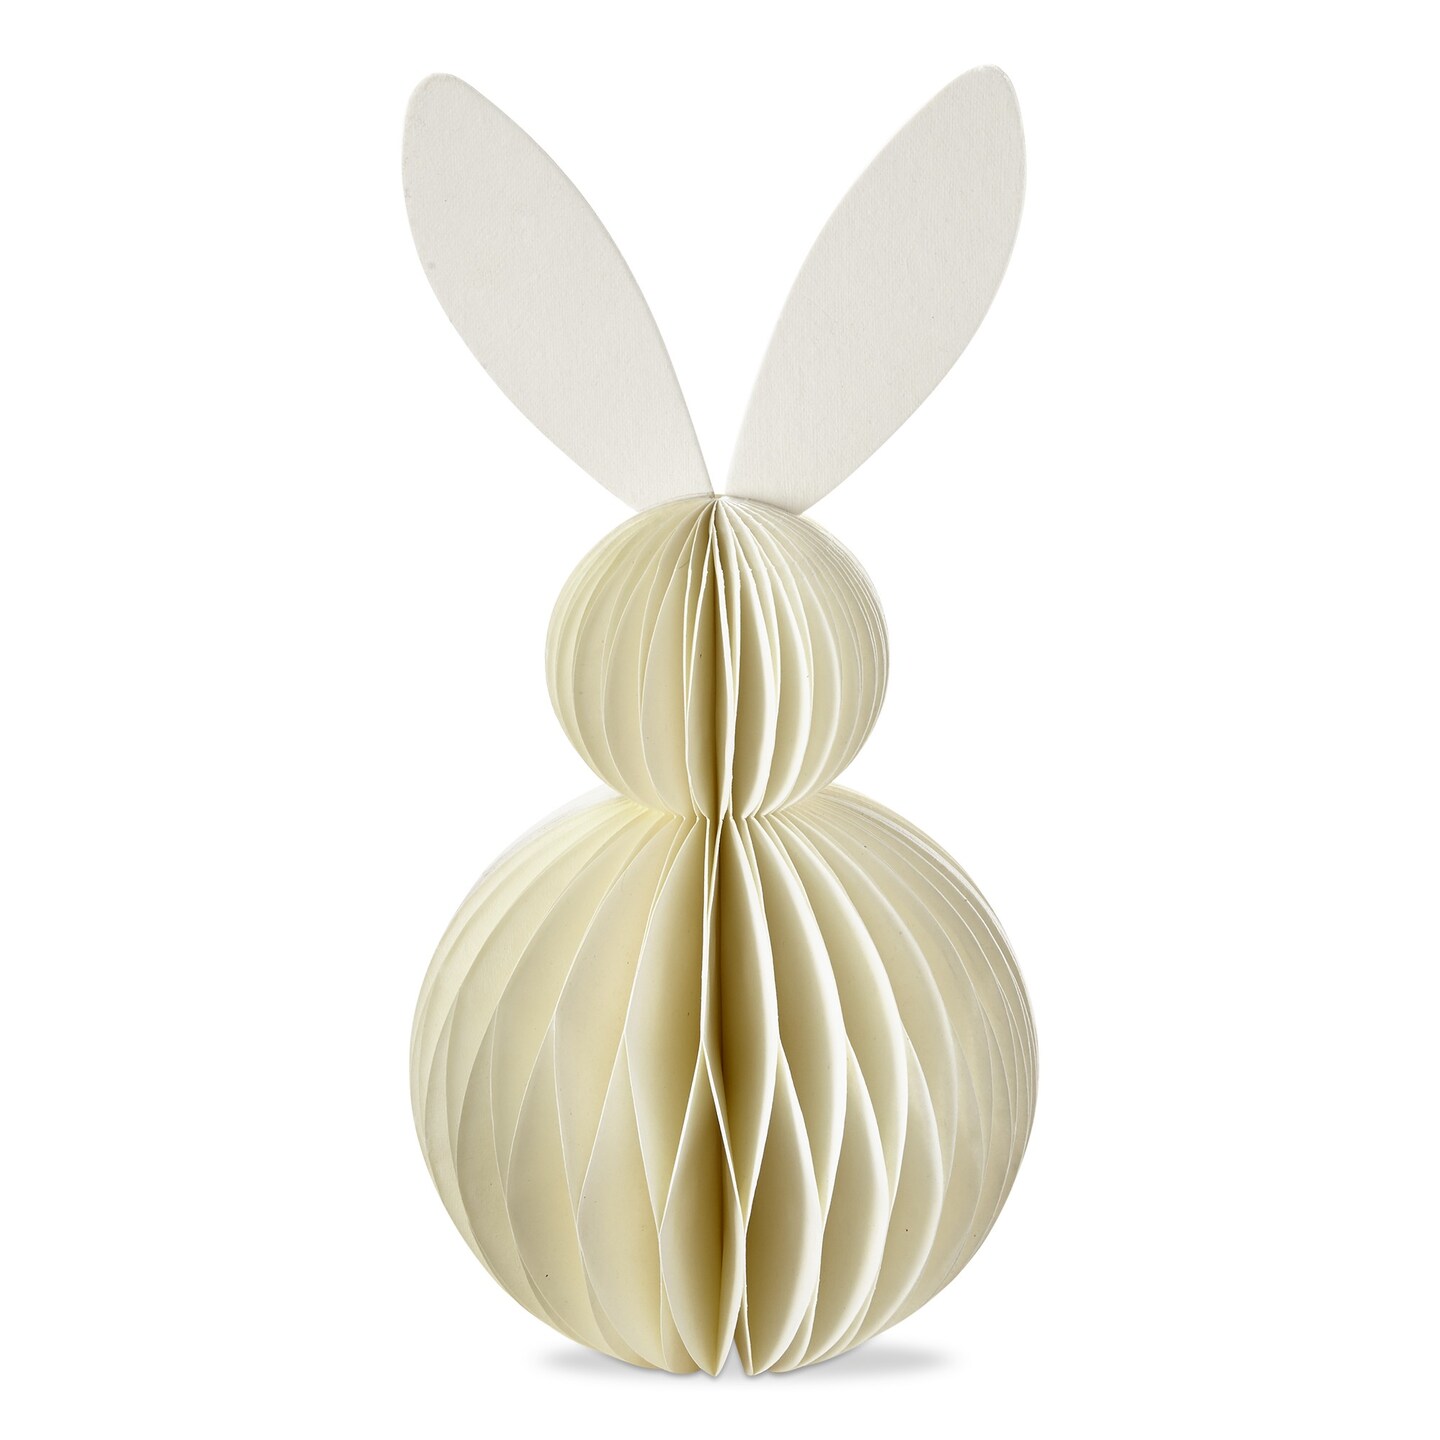 Easter Ivory Bunny Paper Standing Decor Large, 5.0L x 5.0W x 11.8H inches